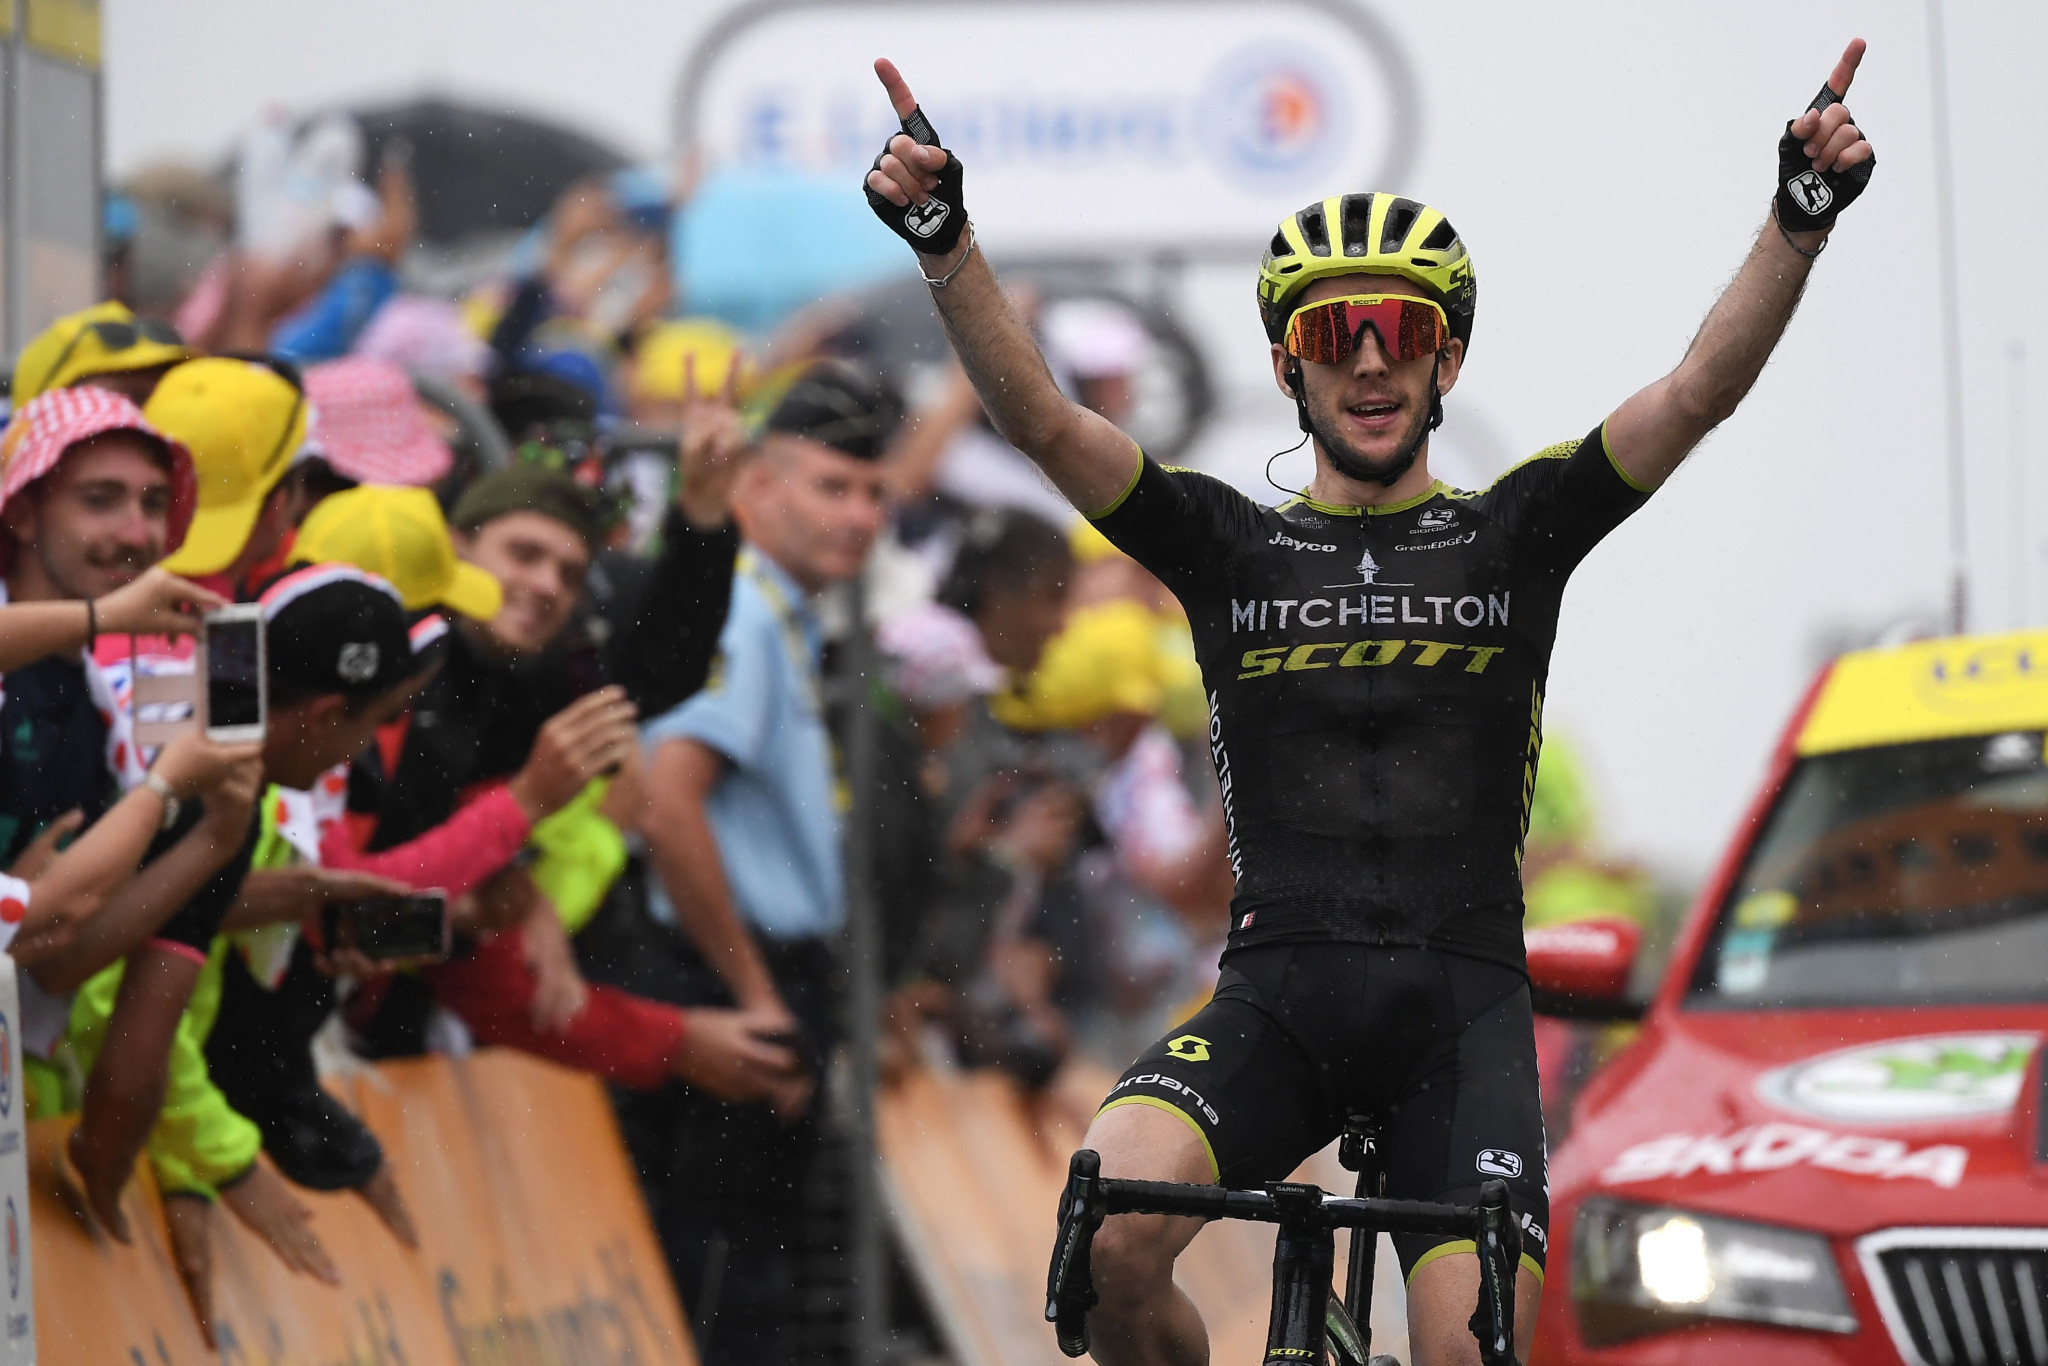 Yates claims second stage victory as challengers gain time on Alaphilippe at Tour de France